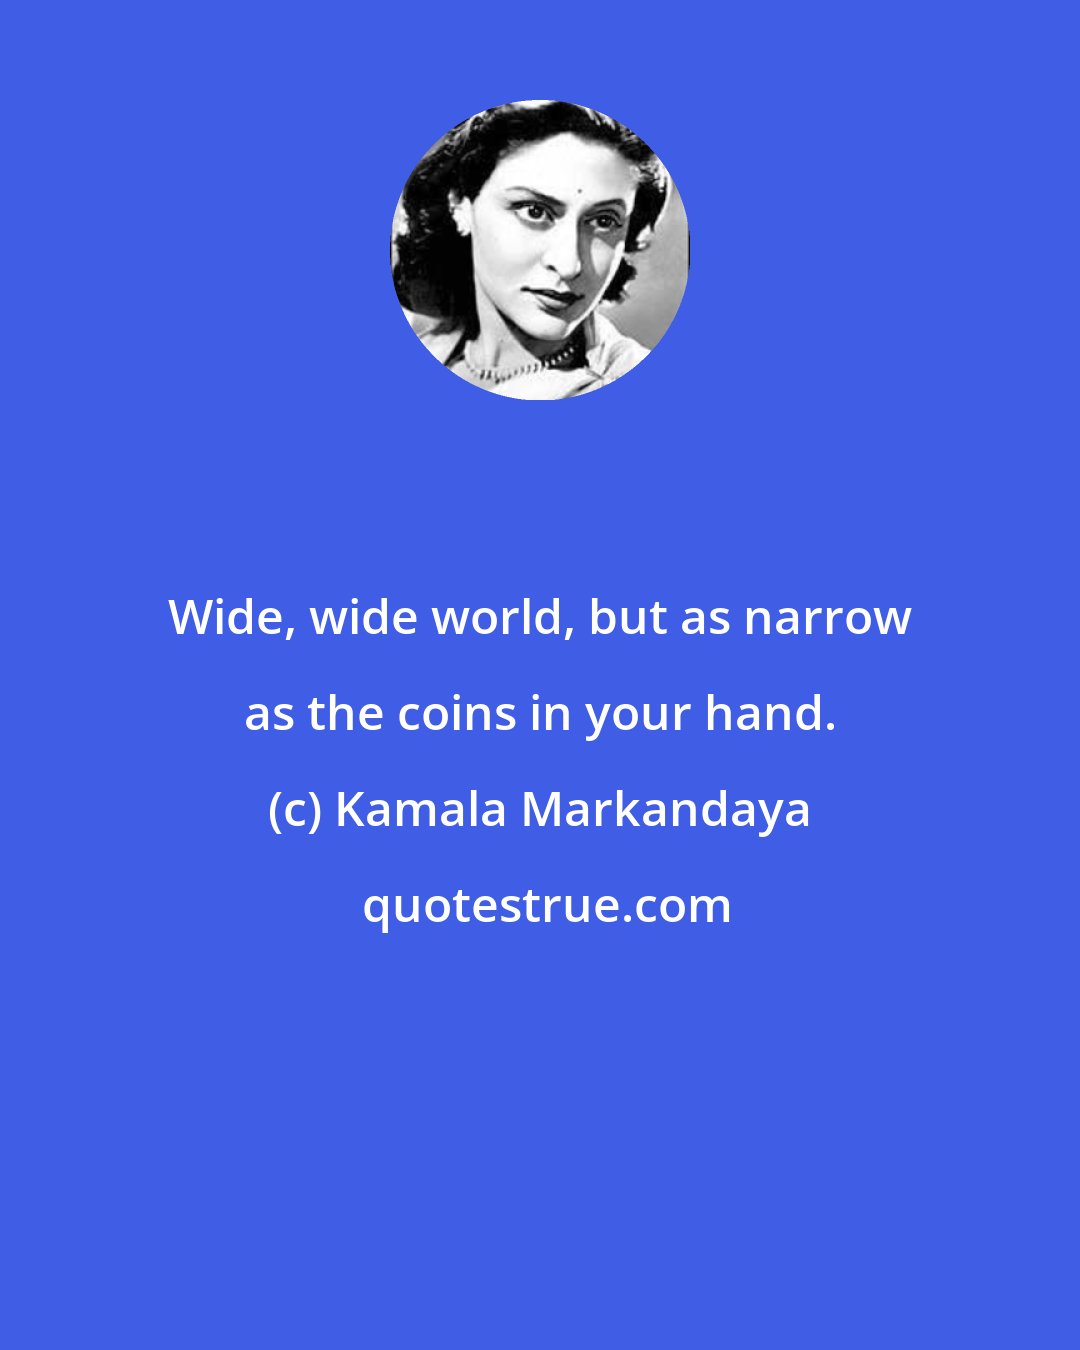 Kamala Markandaya: Wide, wide world, but as narrow as the coins in your hand.